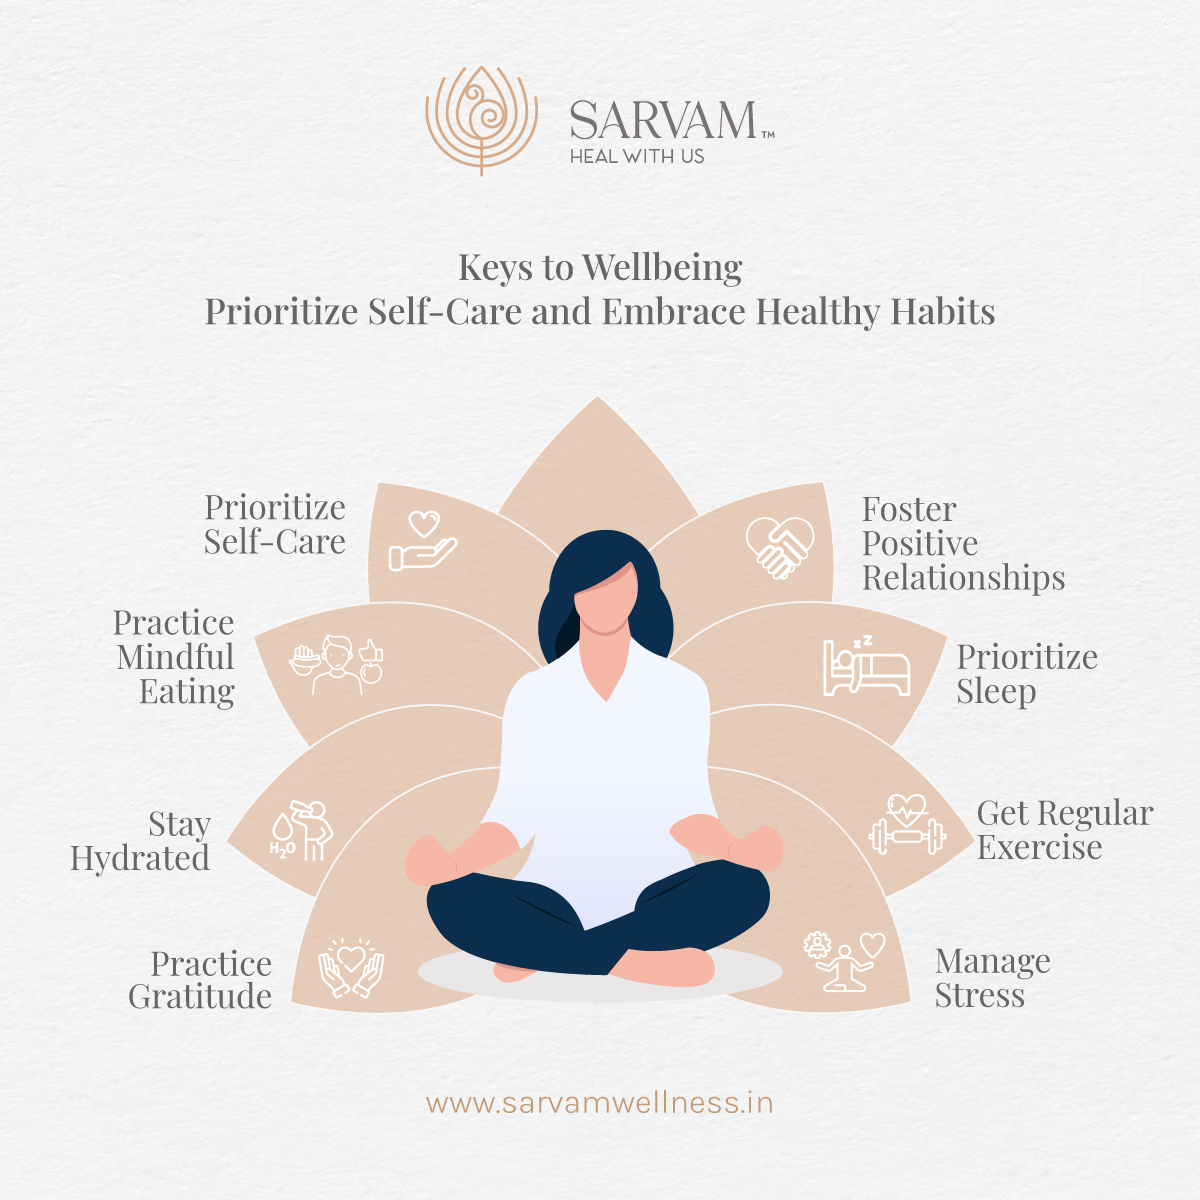 Living a wellness-focused life is essential for maintaining physical, mental, and emotional well-being. 

📲 8980105777
🌐 sarvamwellness.in

#wellbeingiskey #selfcarematters #healthylifestylechoices #healthyhabitsdaily #mindfuleating #stayhydrated  #sarvam #ahmedabad